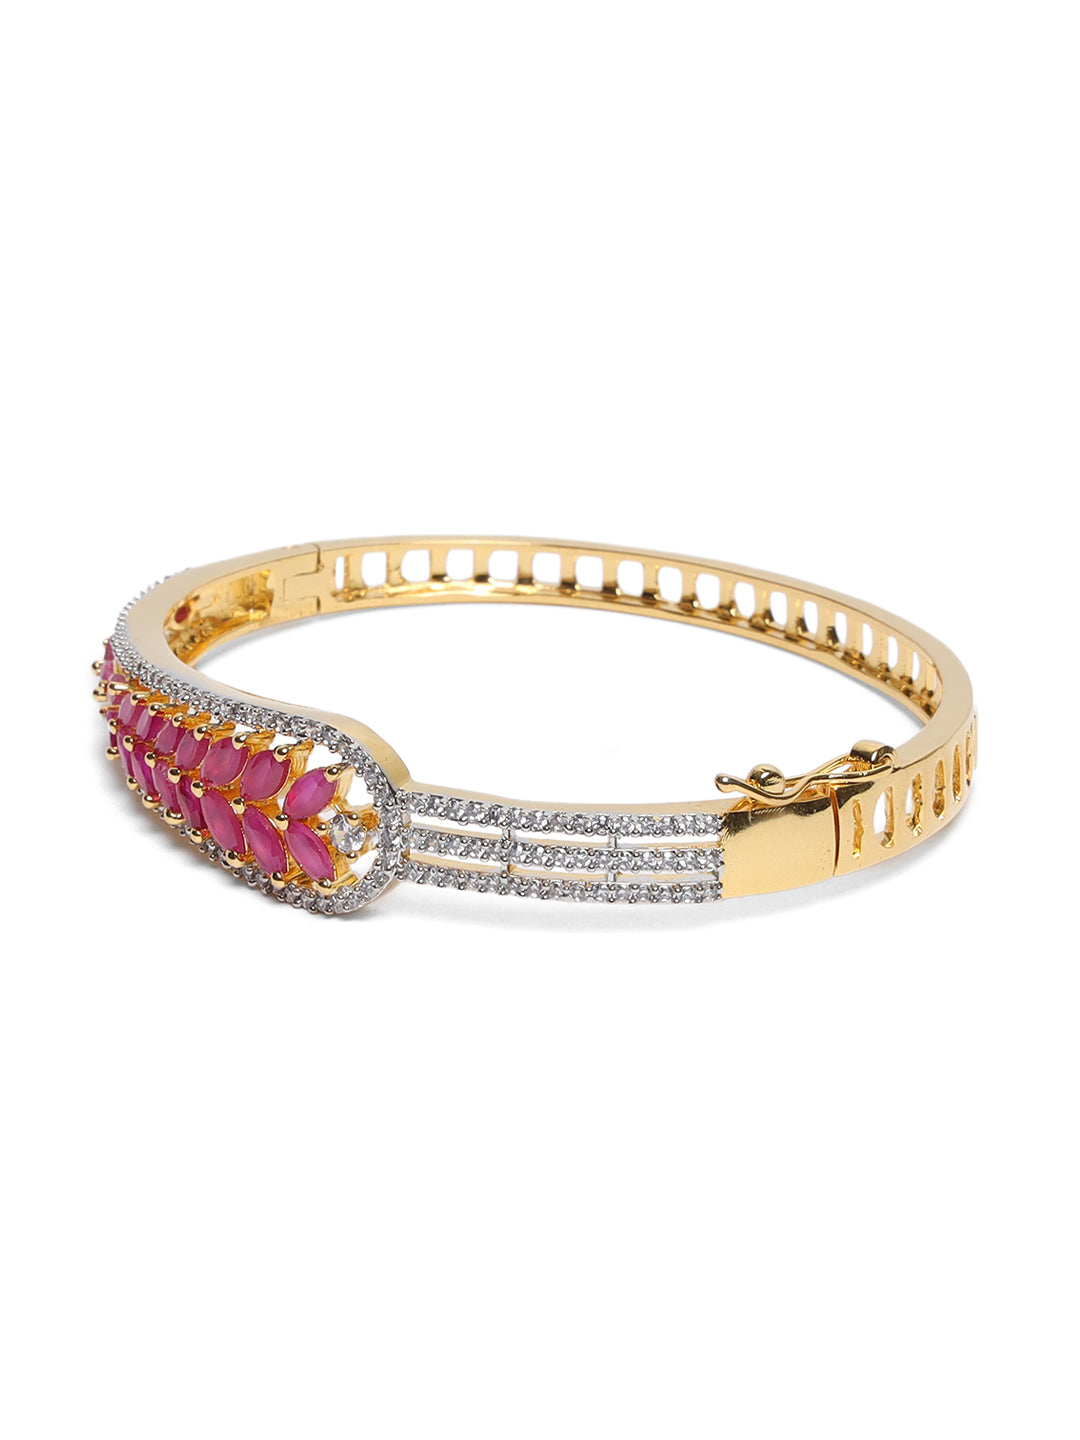 Gold-Plated American Diamond and Ruby Studded Leaf Patterned Bracelet